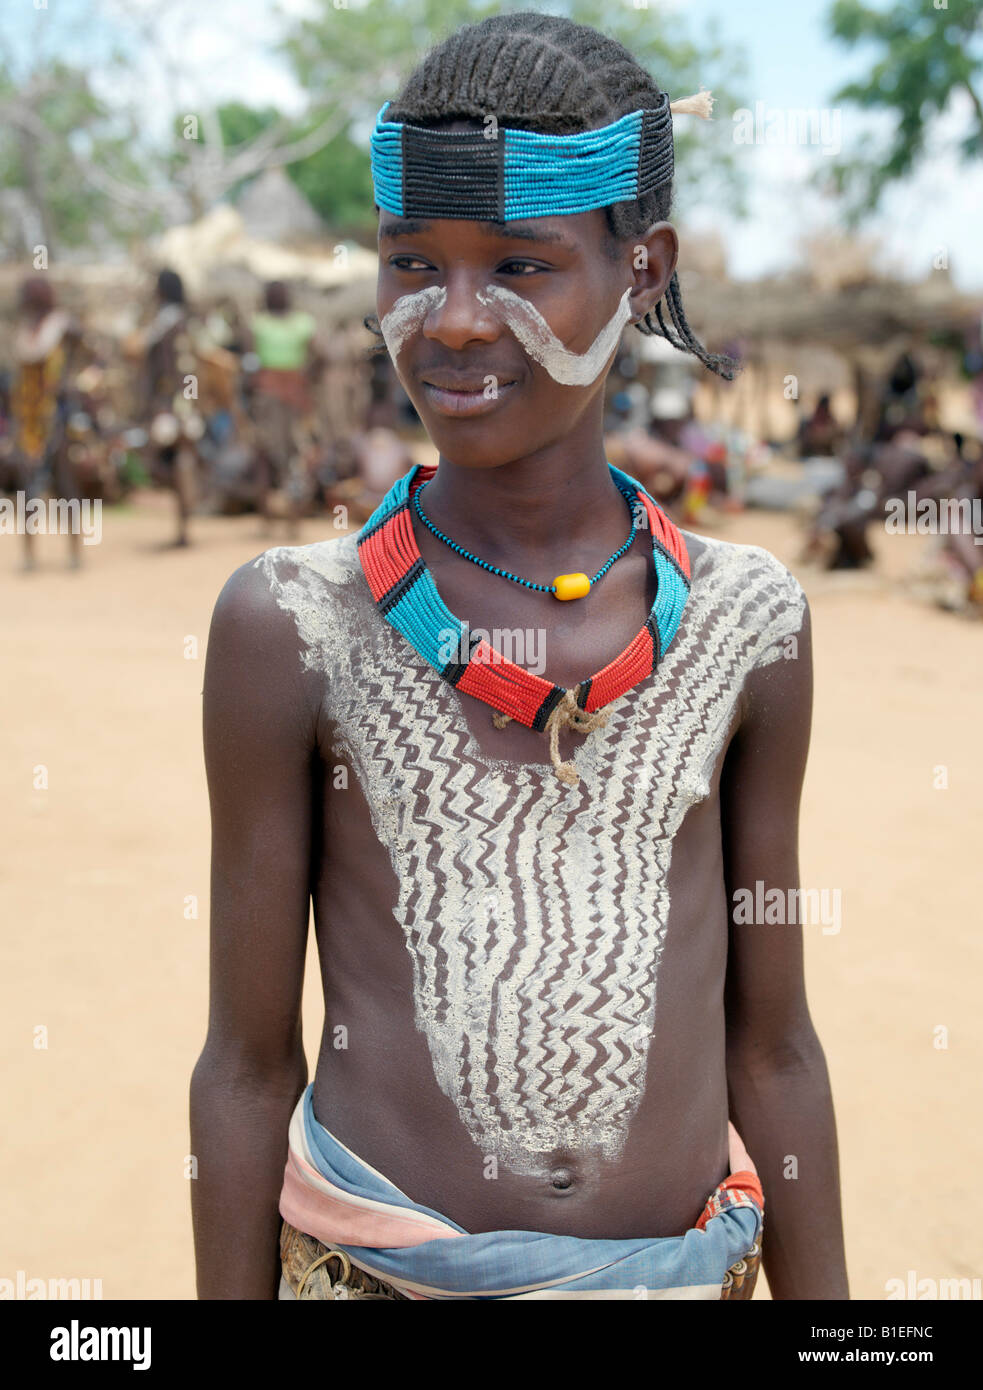 A smart young Hamar youth at Turmi Market.The Hamar are semi-nomadic pastoralists who live in harsh country. Stock Photo